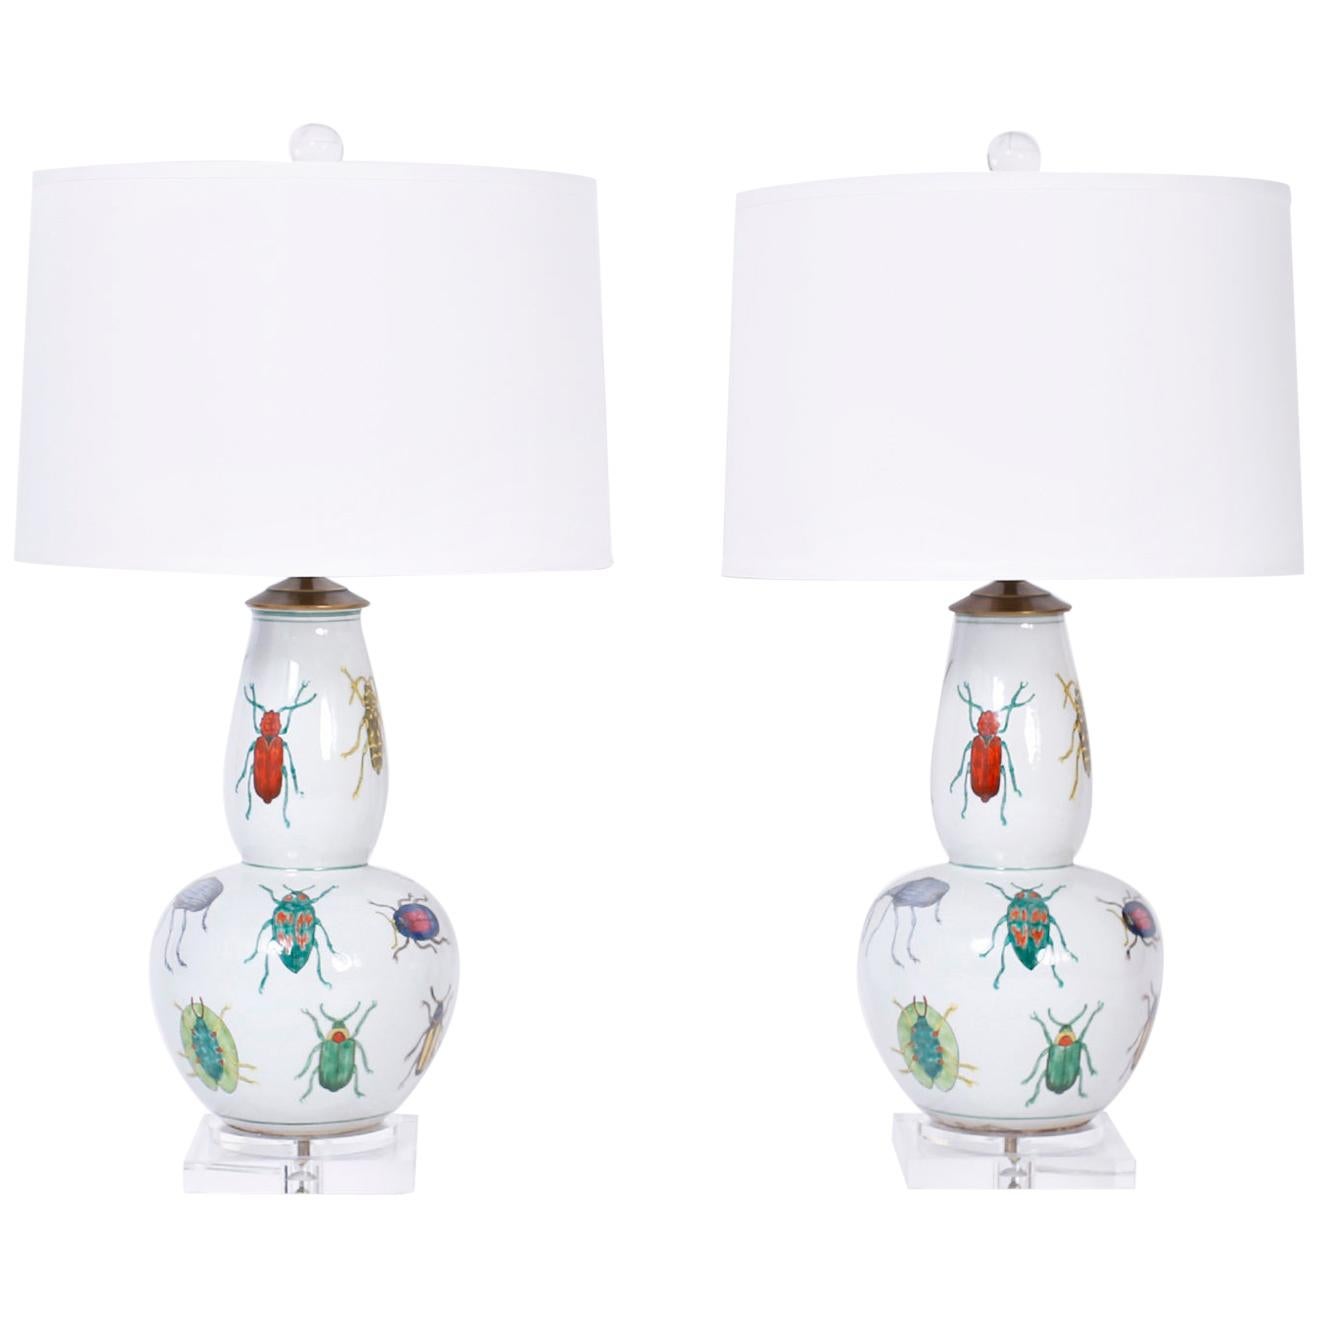 Pair of Decoupage Double Gourd Table Lamps